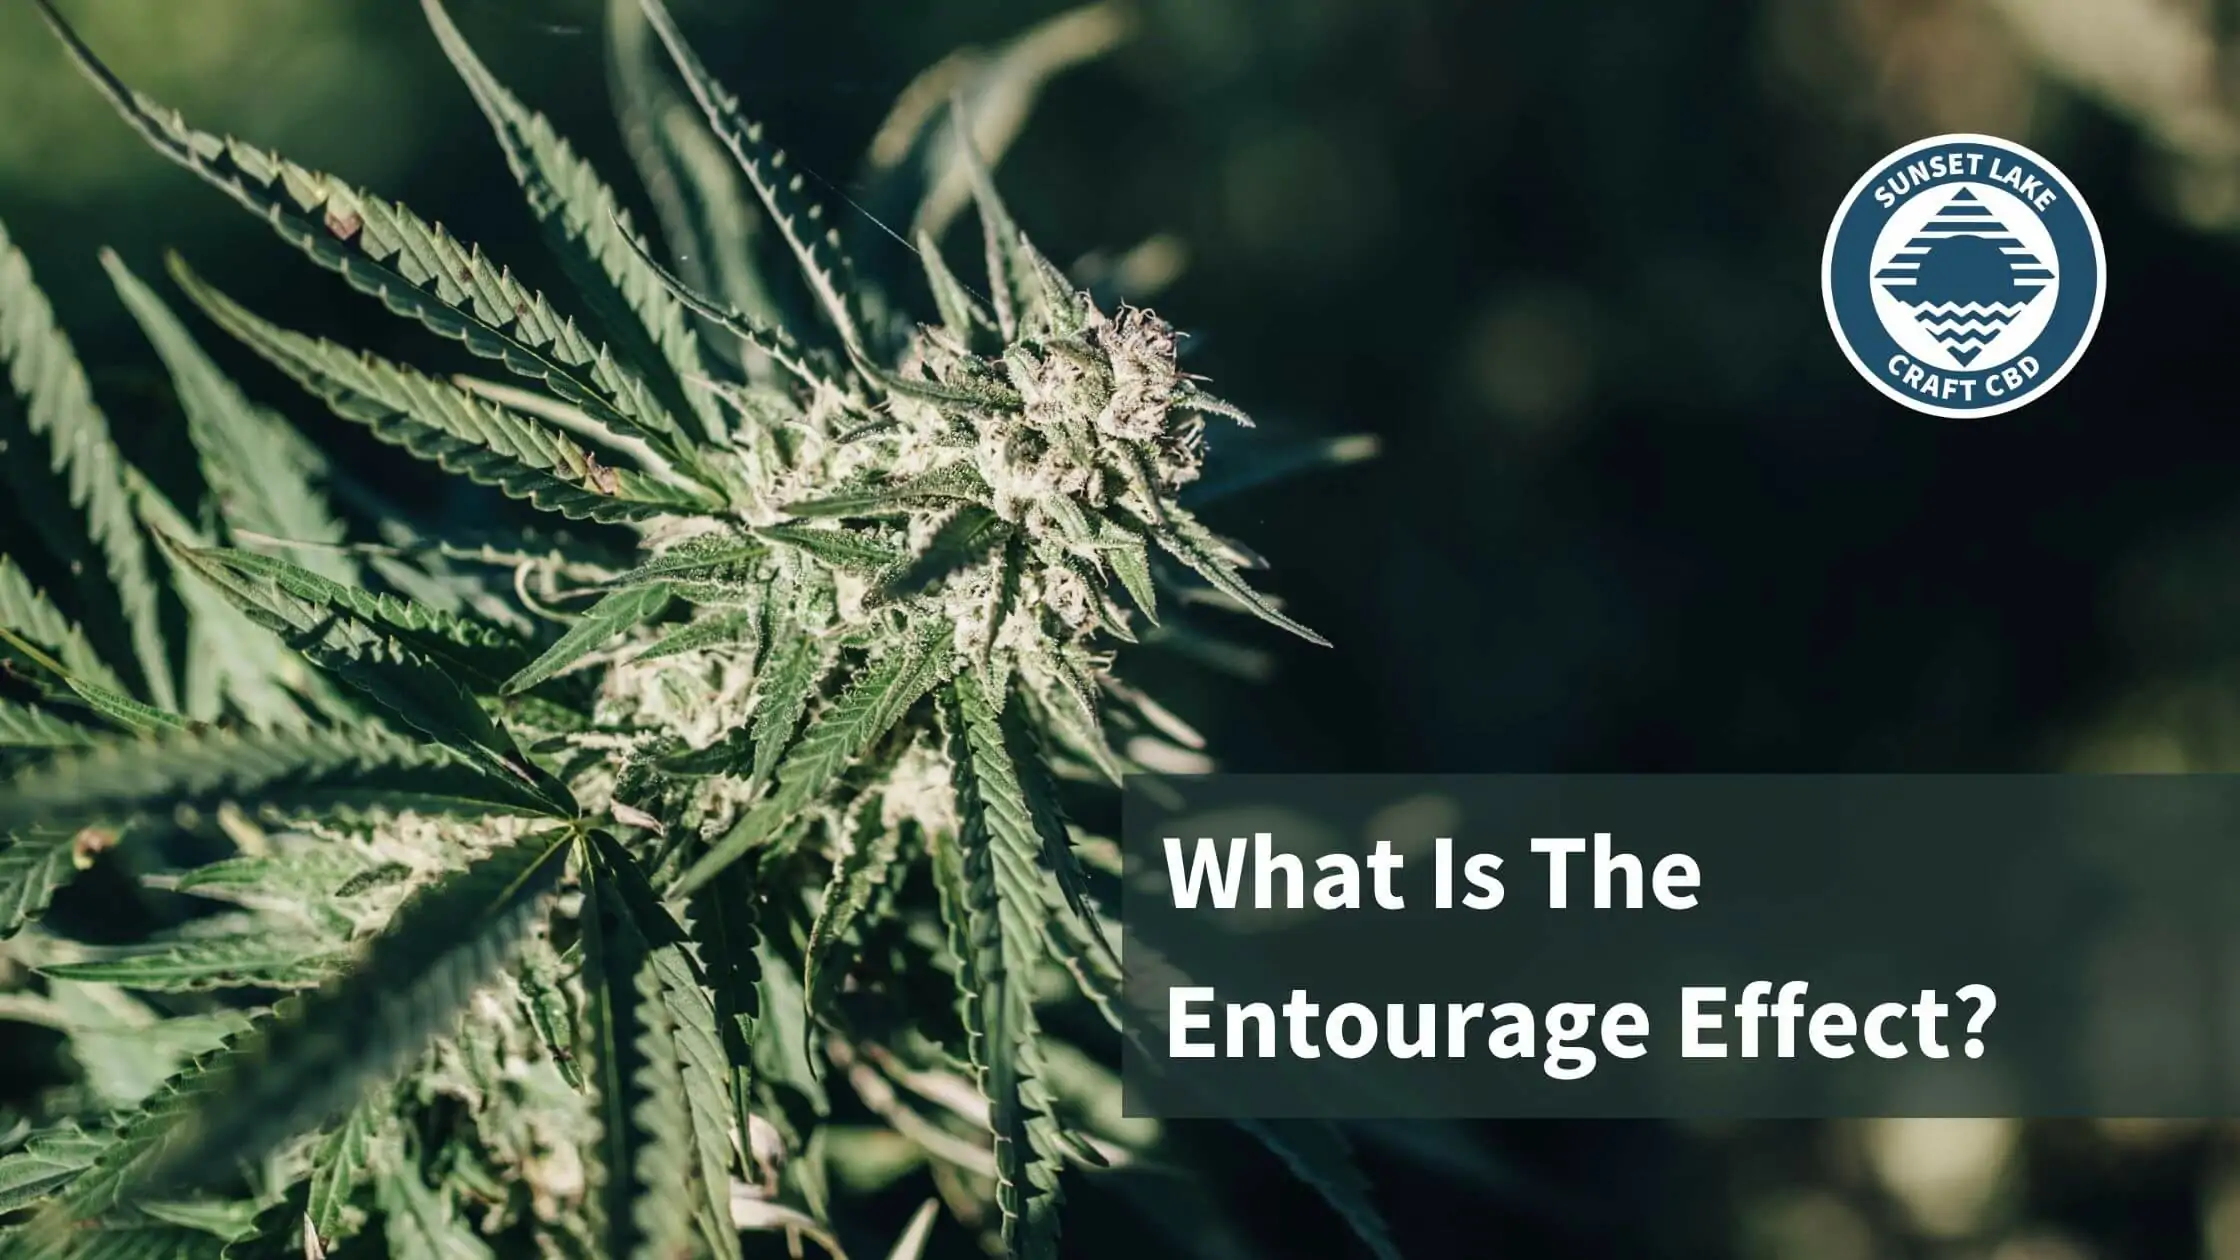 The Entourage Effect: What Is It & How Does It Work?